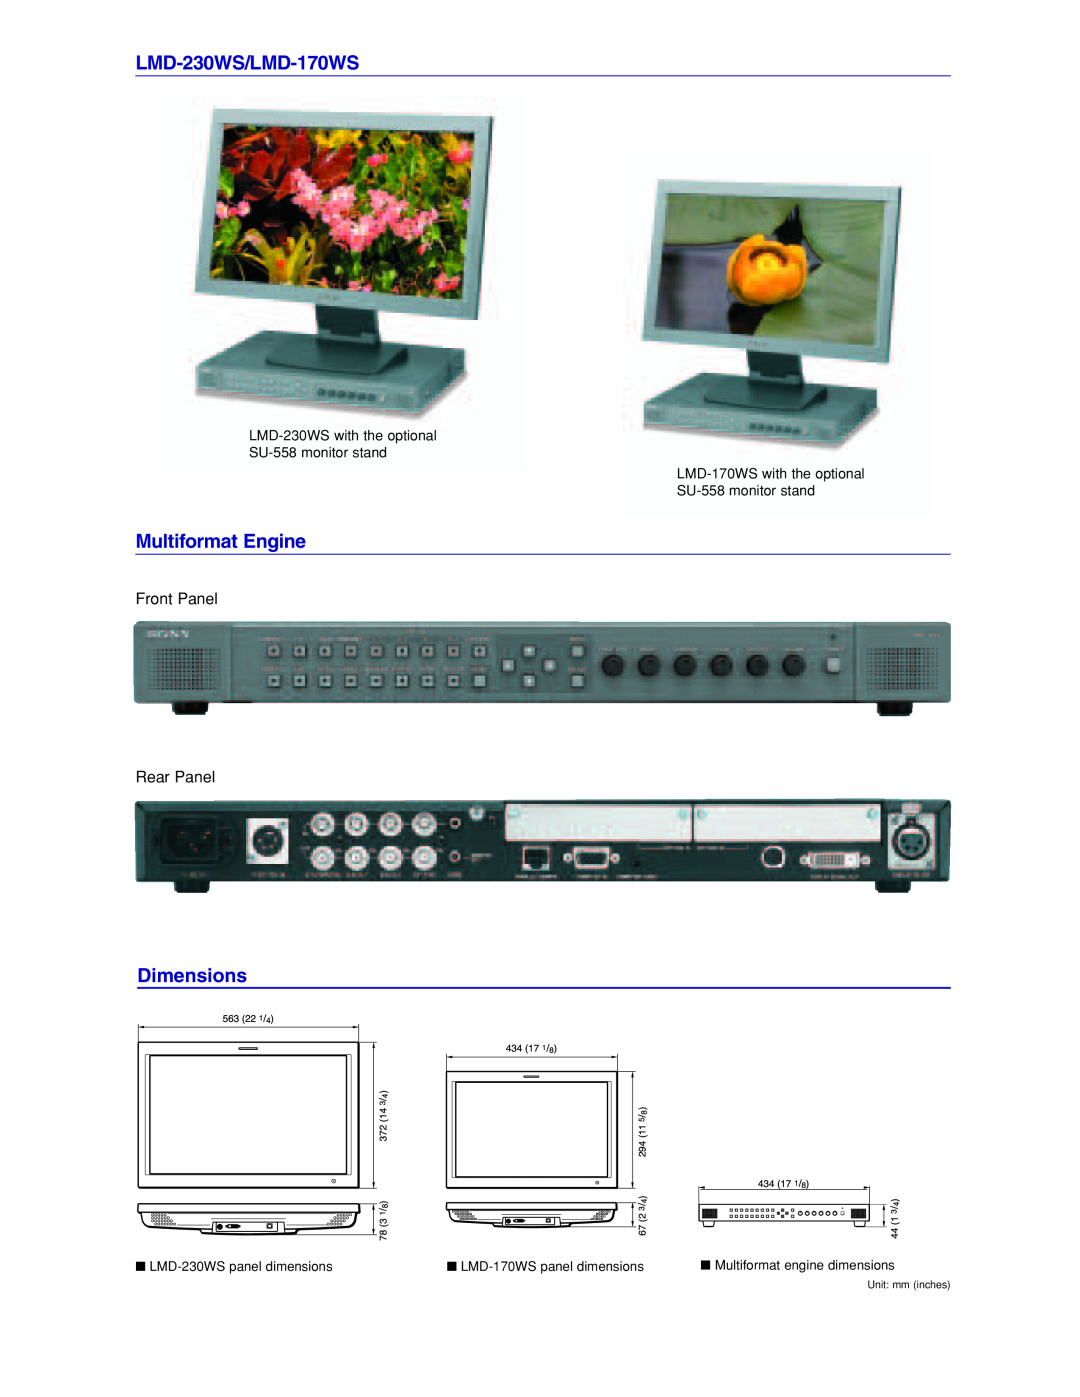 Sony manual LMD-230WS/LMD-170WS, Multiformat Engine, Front Panel Rear Panel, Dimensions, LMD-230WS panel dimensions 